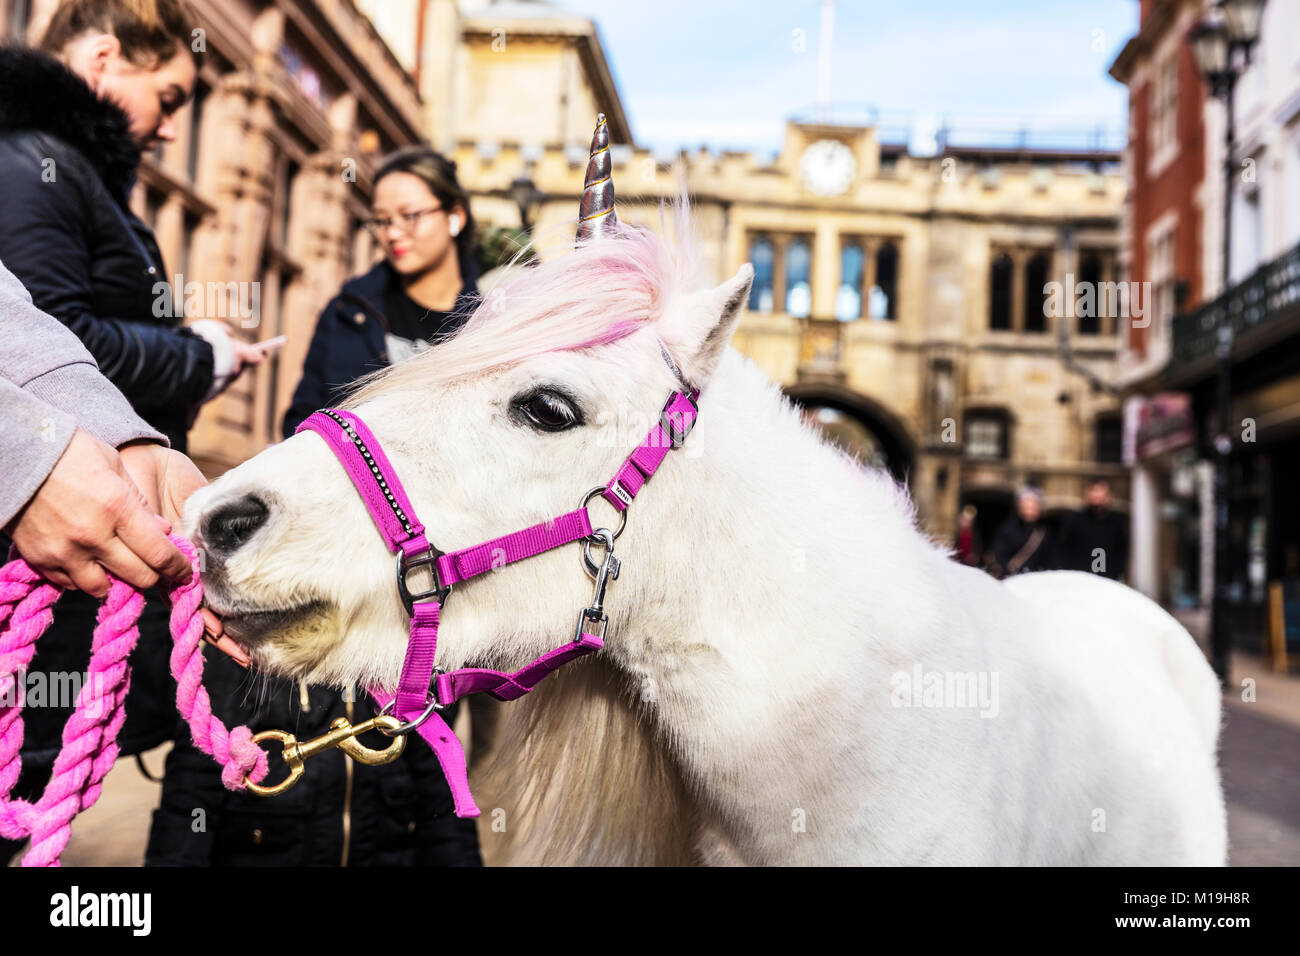 Lincoln, UK. 28th Jan 2018. Unicorn on the streets of Lincoln city, Lincolnshire, UK, on 28/01/18 cute unicorn pony complete with horn on Lincoln high street. Credit: Iconic Cornwall/Alamy Live News Stock Photo